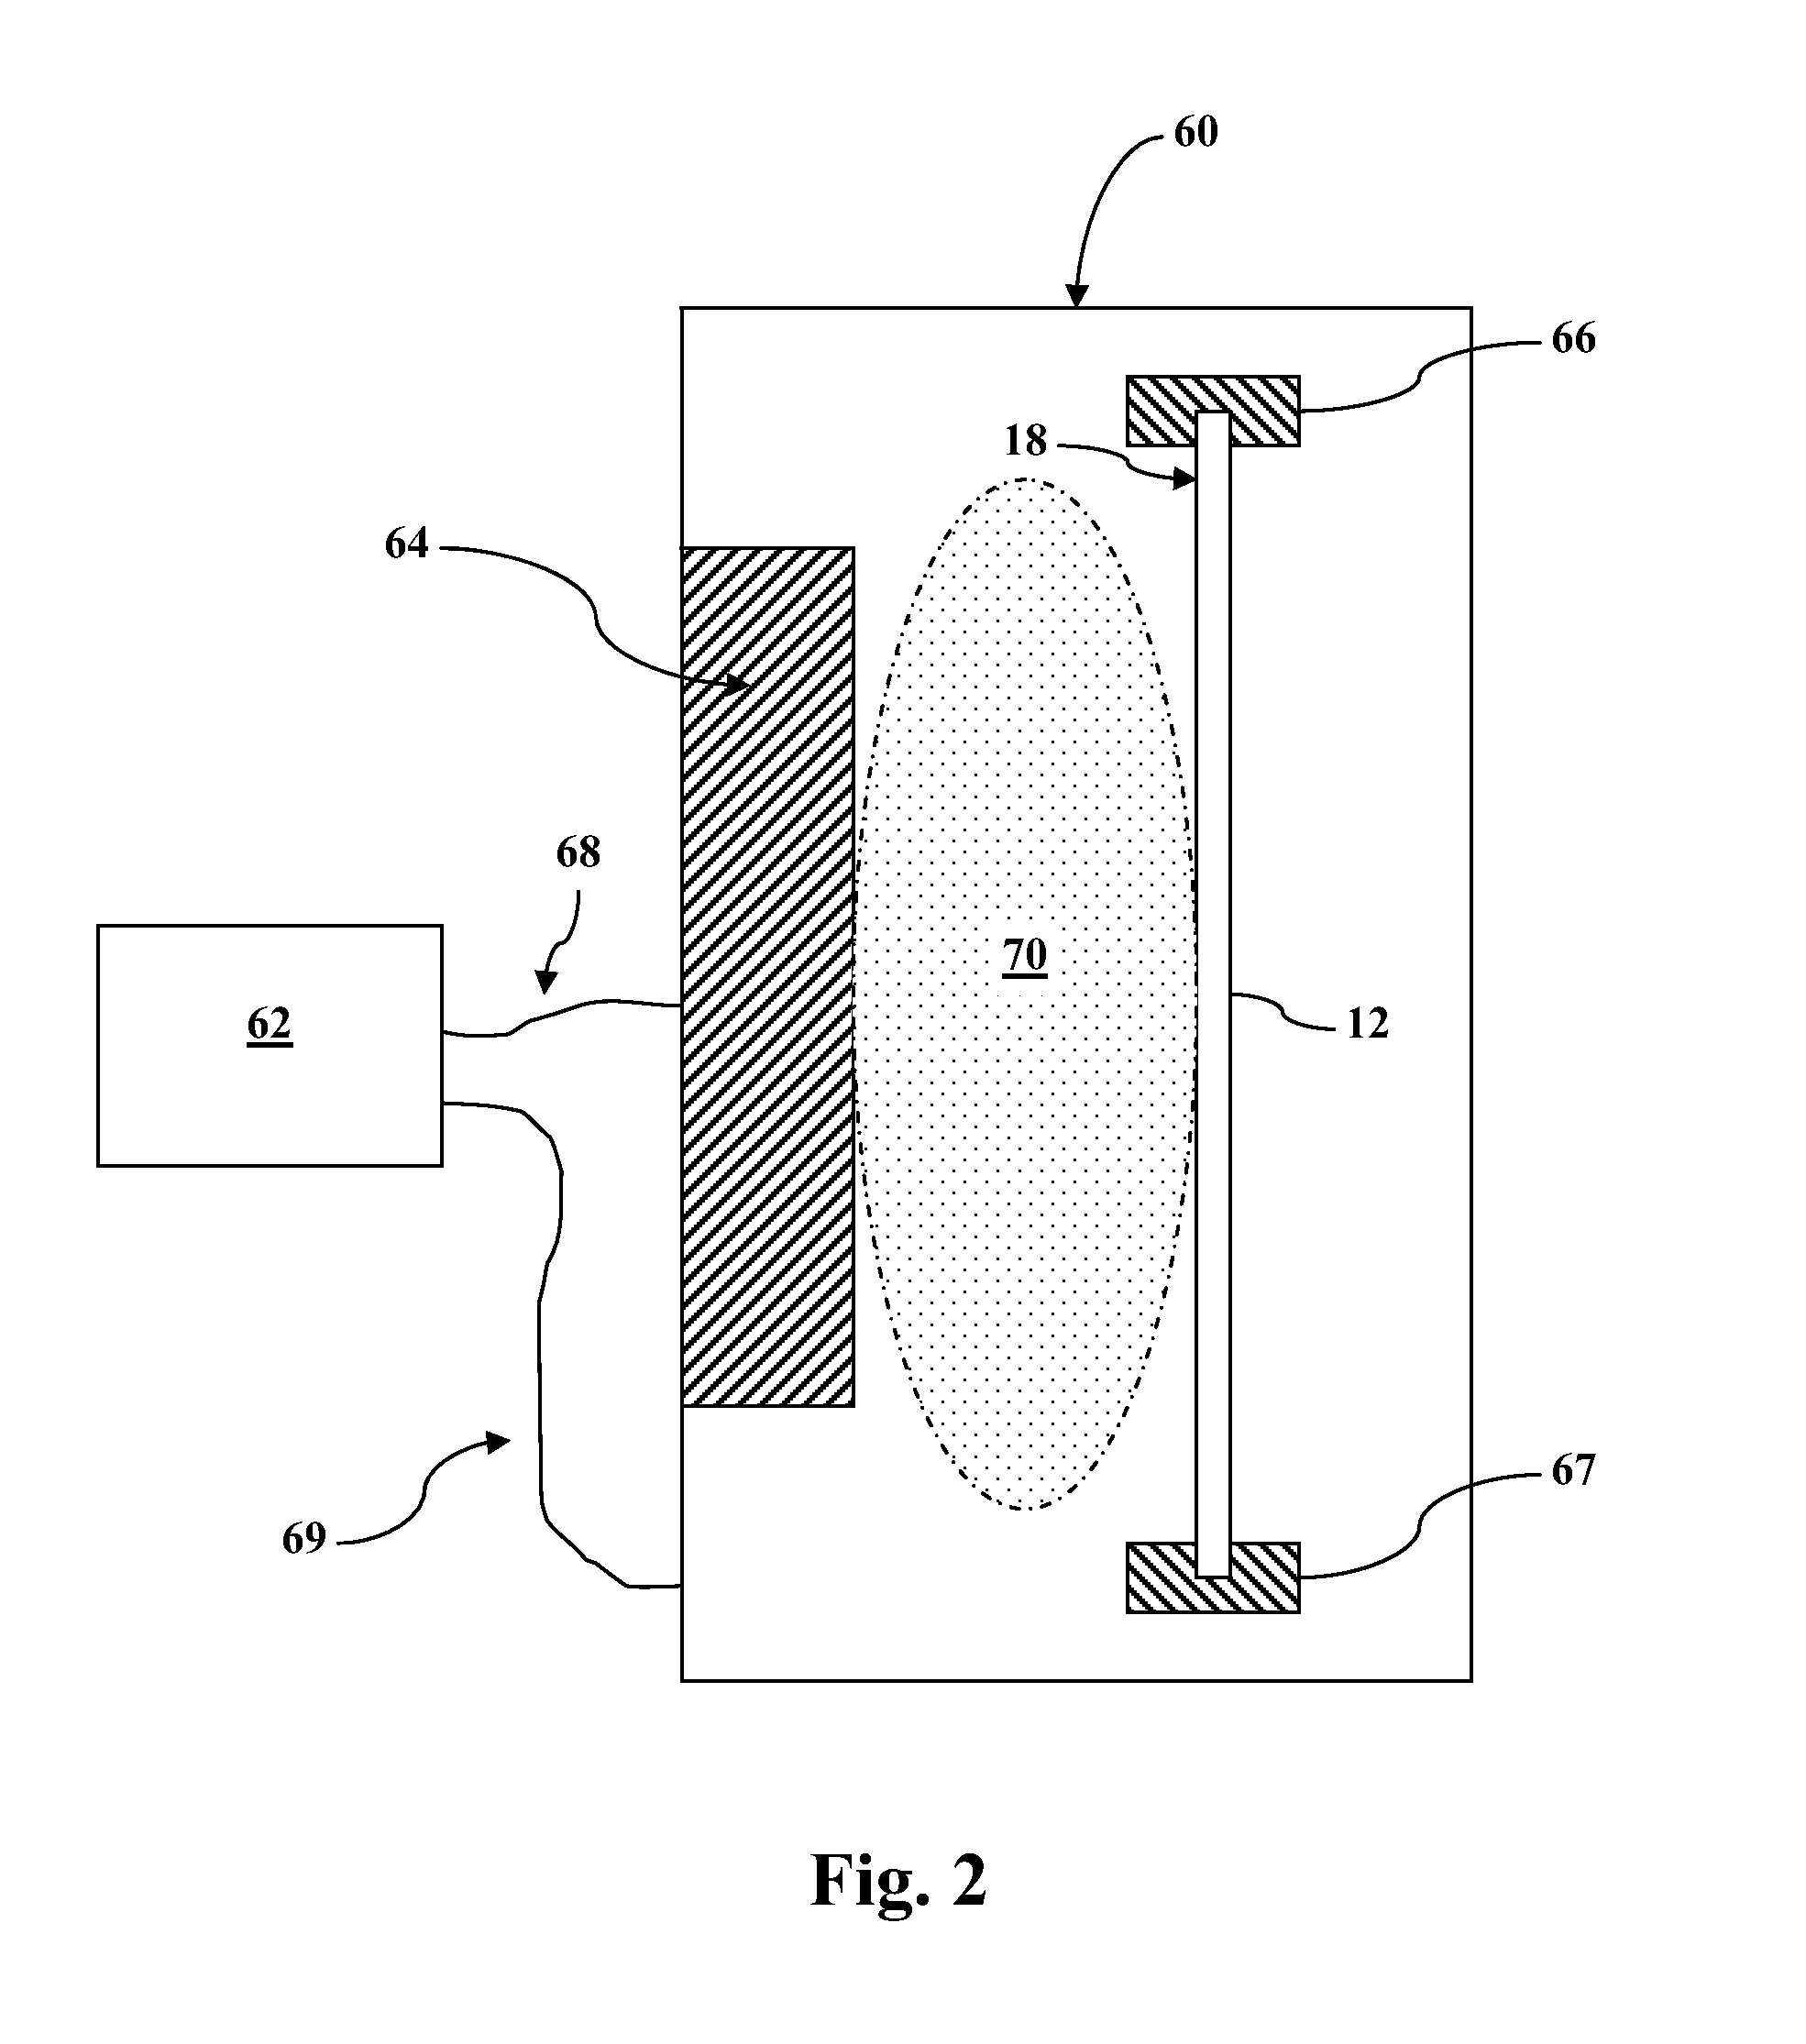 Methods of sputtering cadmium sulfide layers for use in cadmium telluride based thin film photovoltaic devices